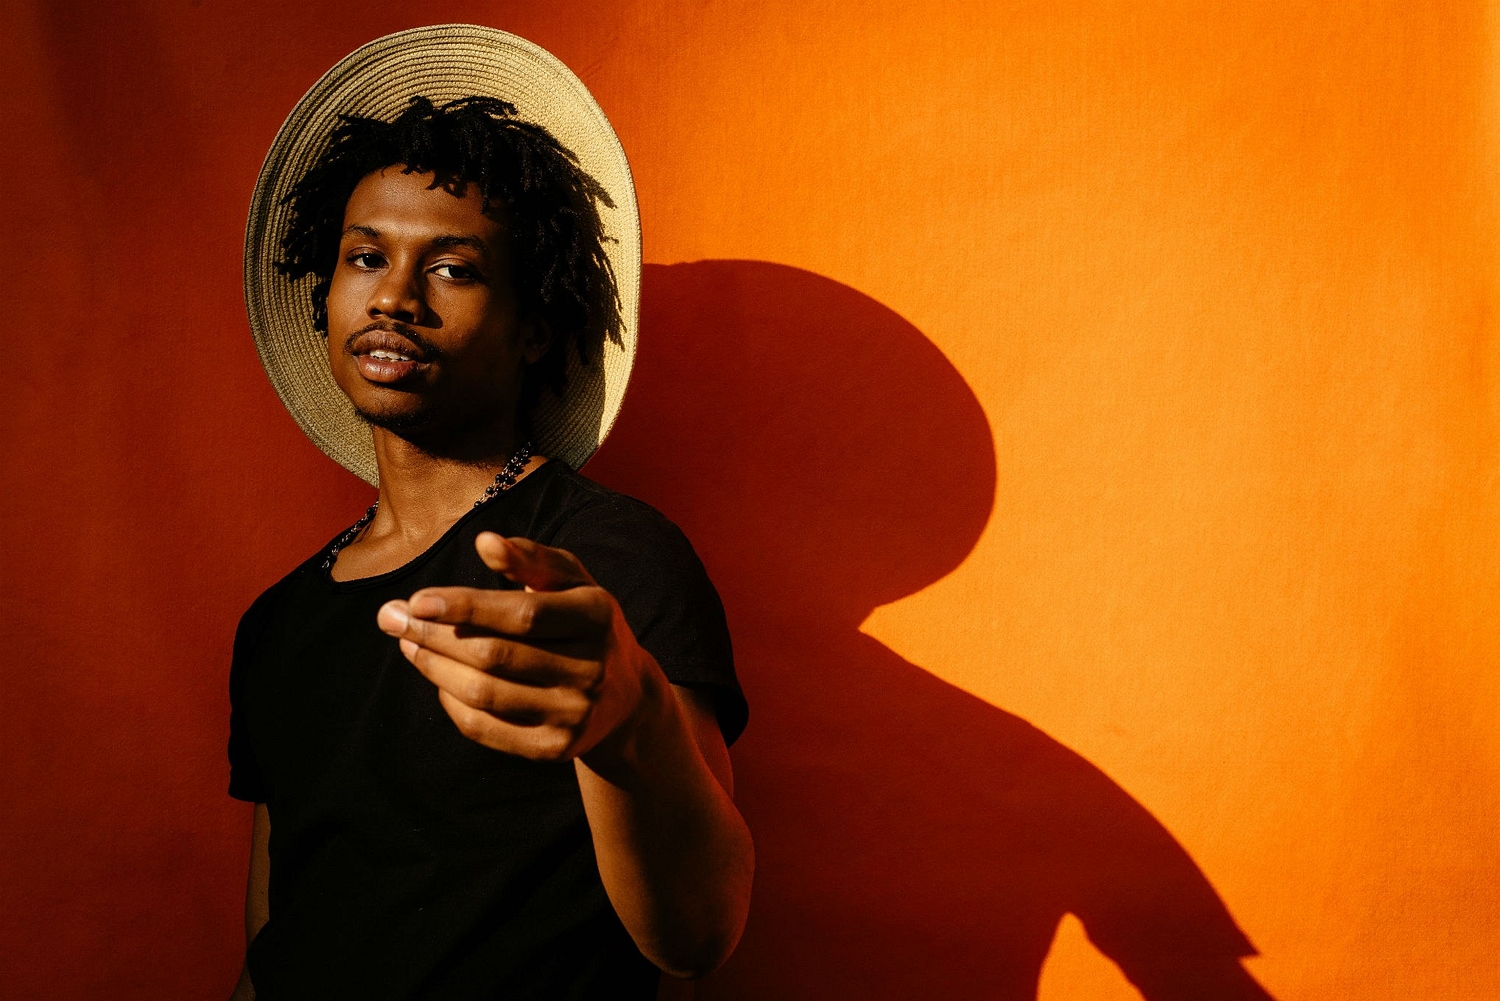 Here’s what’s up - Raury: “I’m a super wildcard, you don’t know what I’m gonna make next”